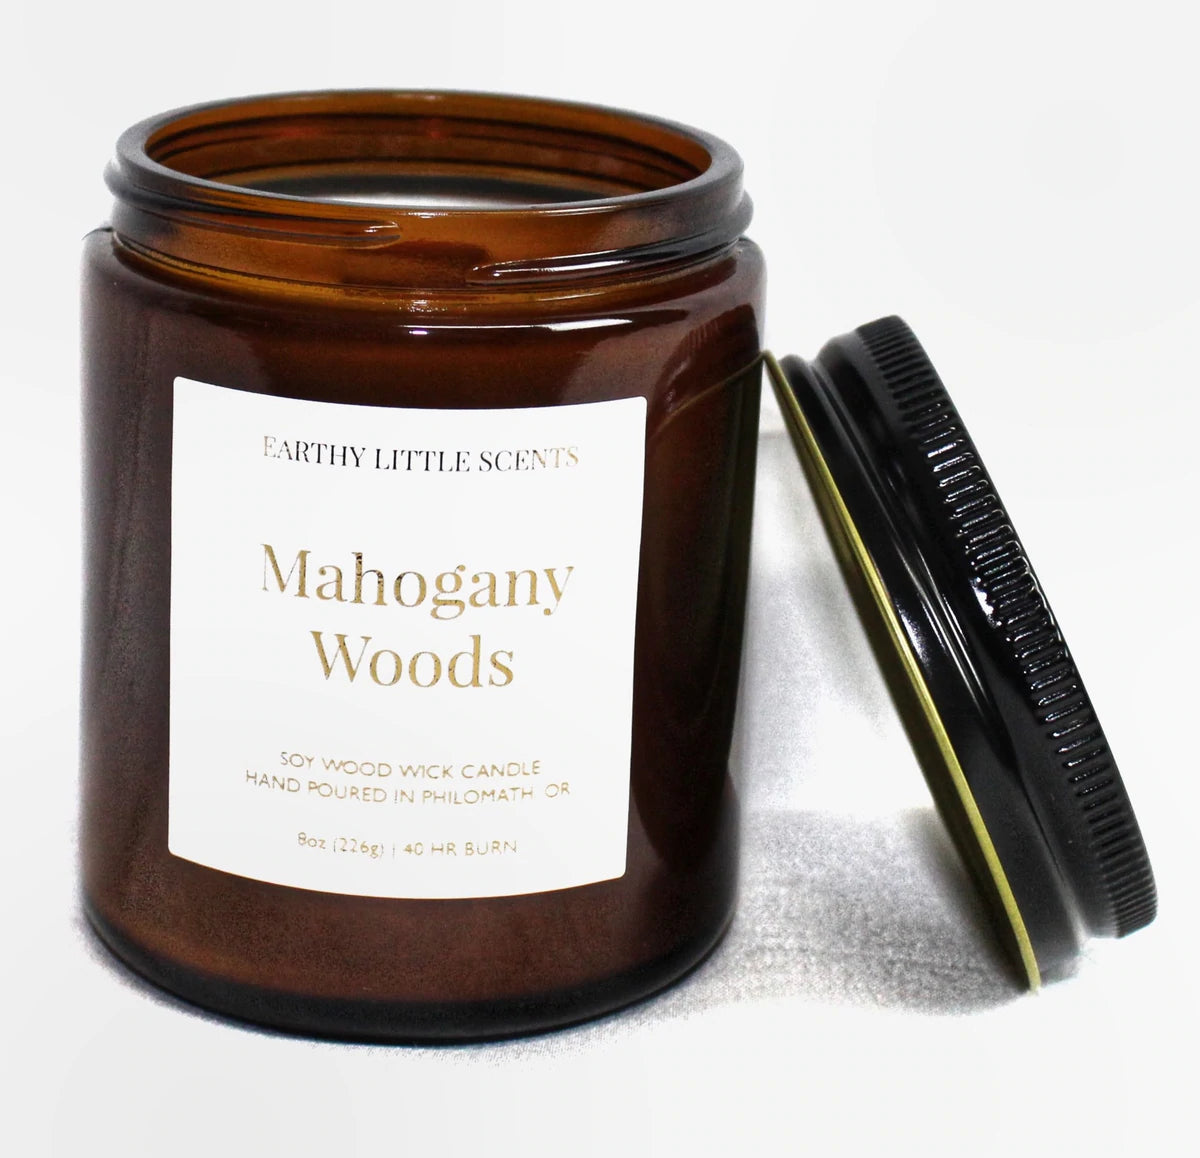 Mahogany Woods Soy Wood Wick Candle